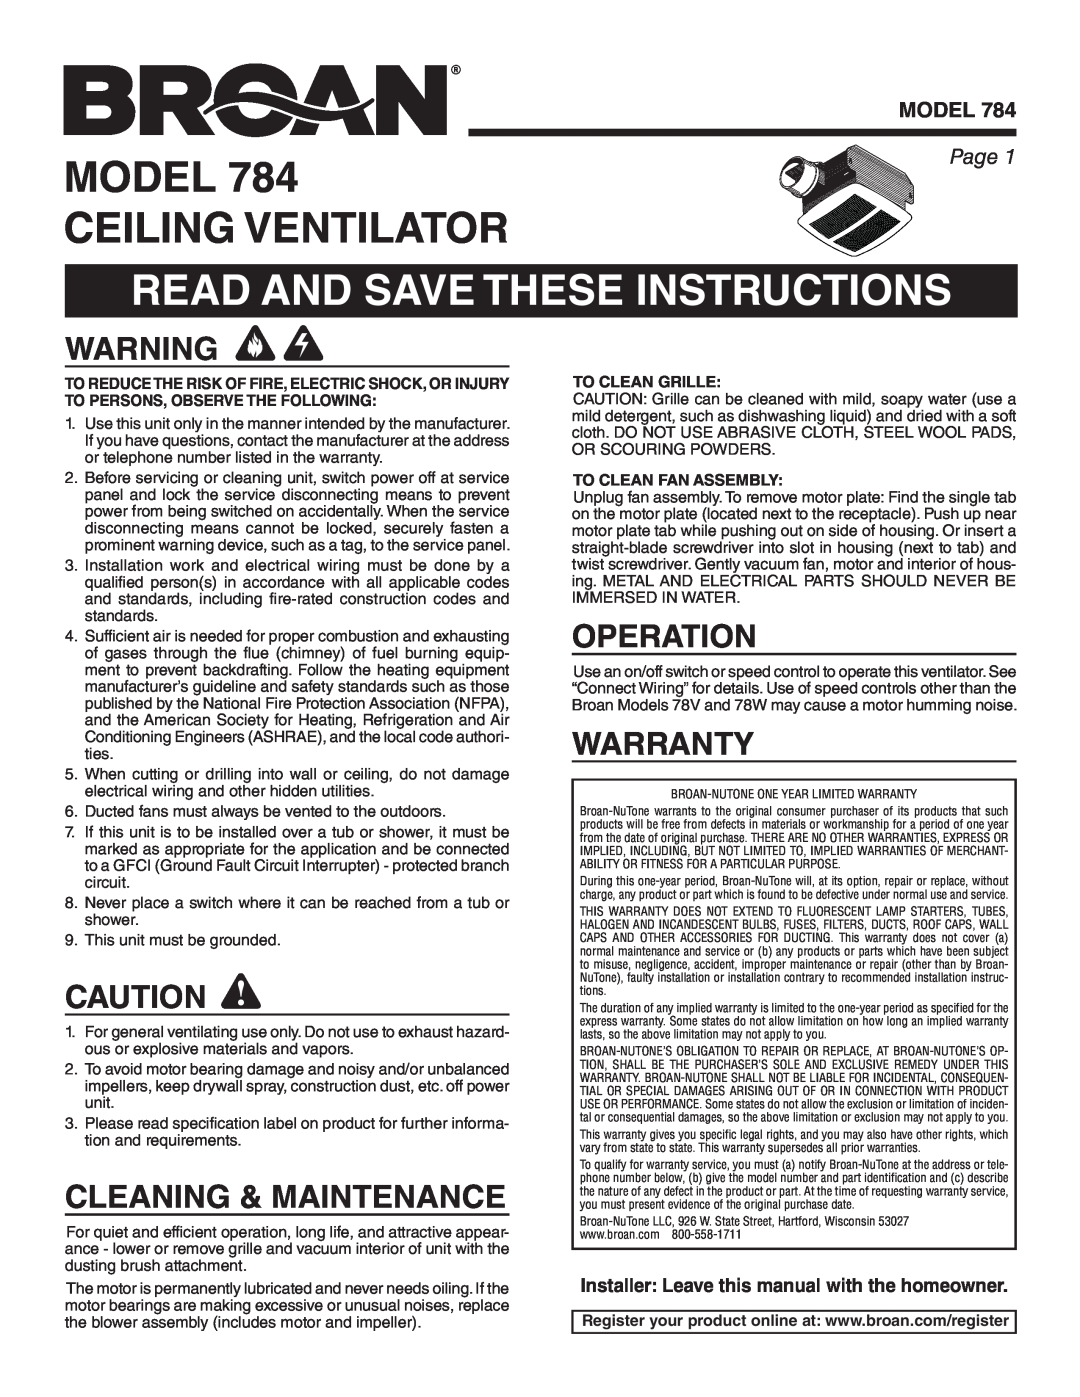 Broan 784 manual Model Ceiling Ventilator, Read And Save These Instructions, Cleaning & Maintenance, Operation, Warranty 